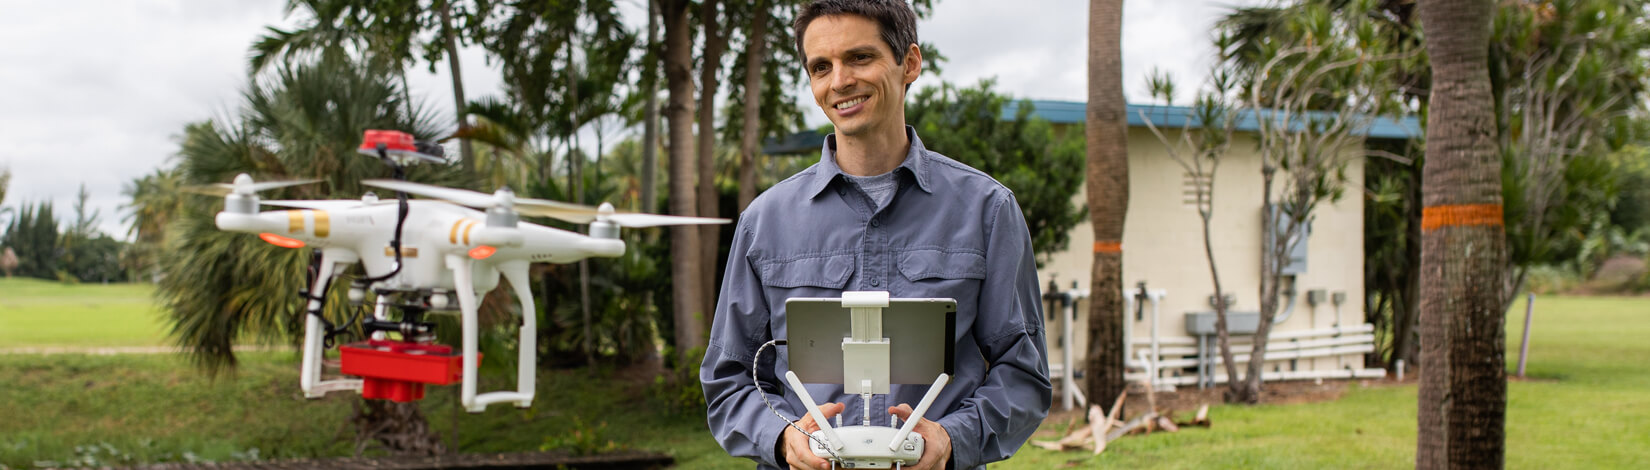 Adam Benjamin using a Research Drone -  Ft. Lauderdale Research and Education Center